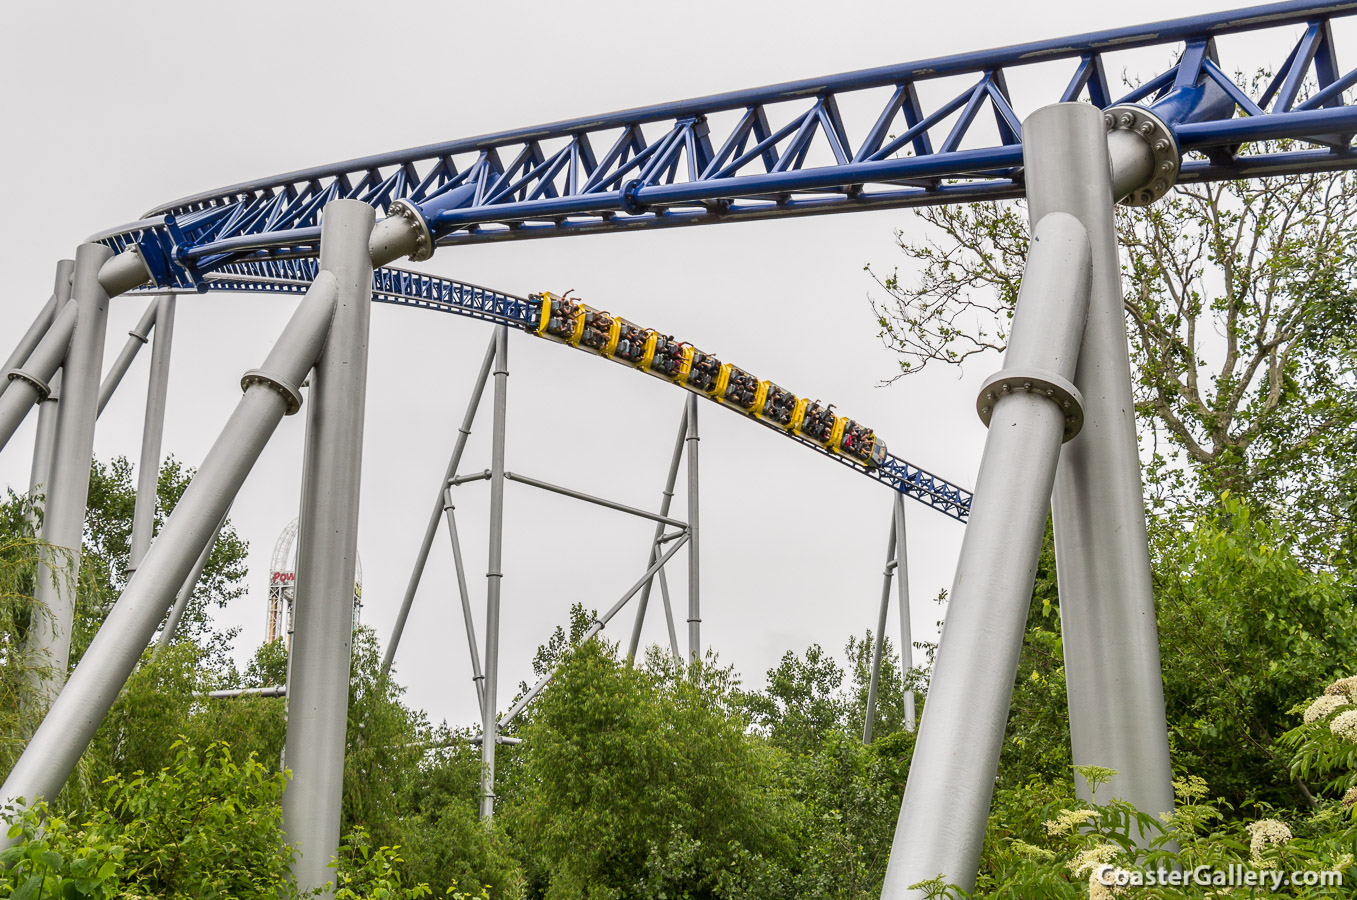 Overbanked turns on the Millennium Force Roller Coaster